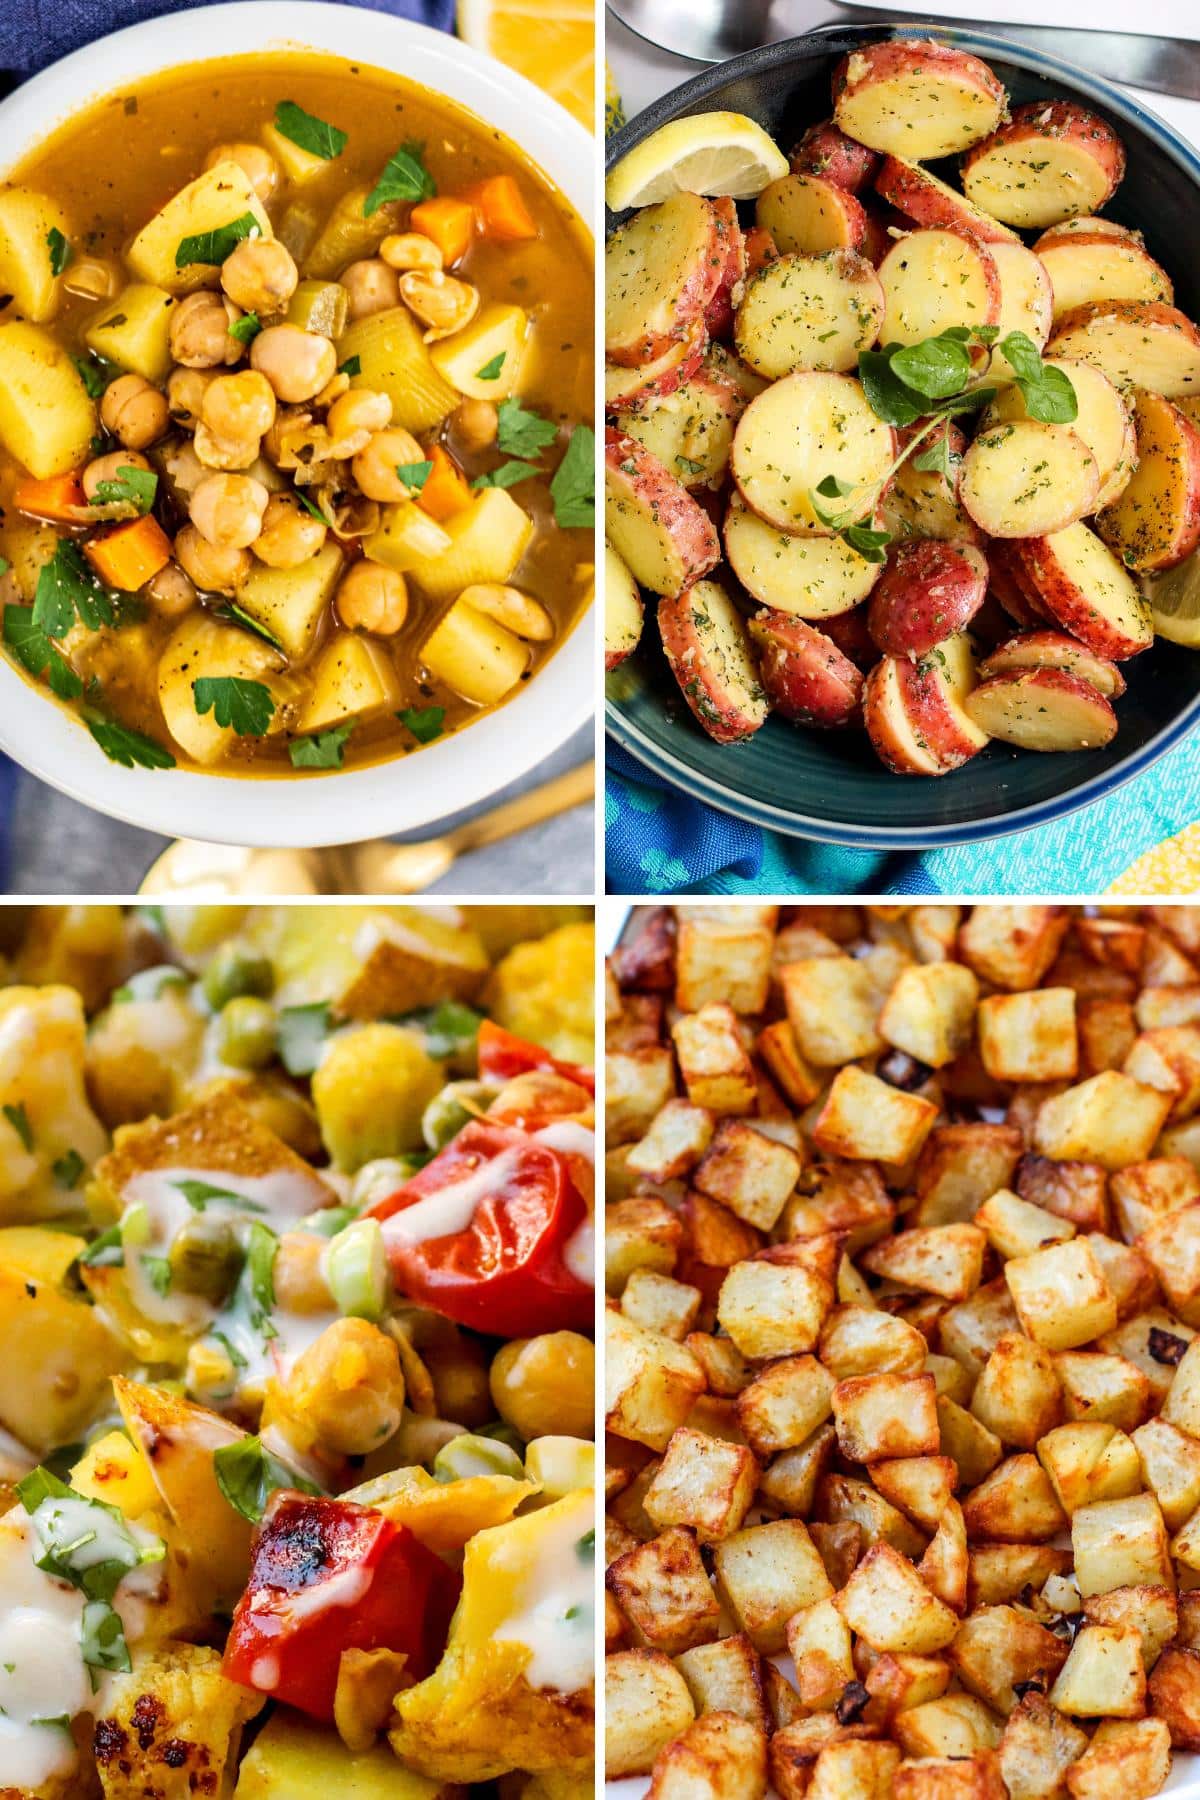 Chickpea Soup, Greek Potato Salad, Curry Grill Packets, and Air Fryer Home Fries.